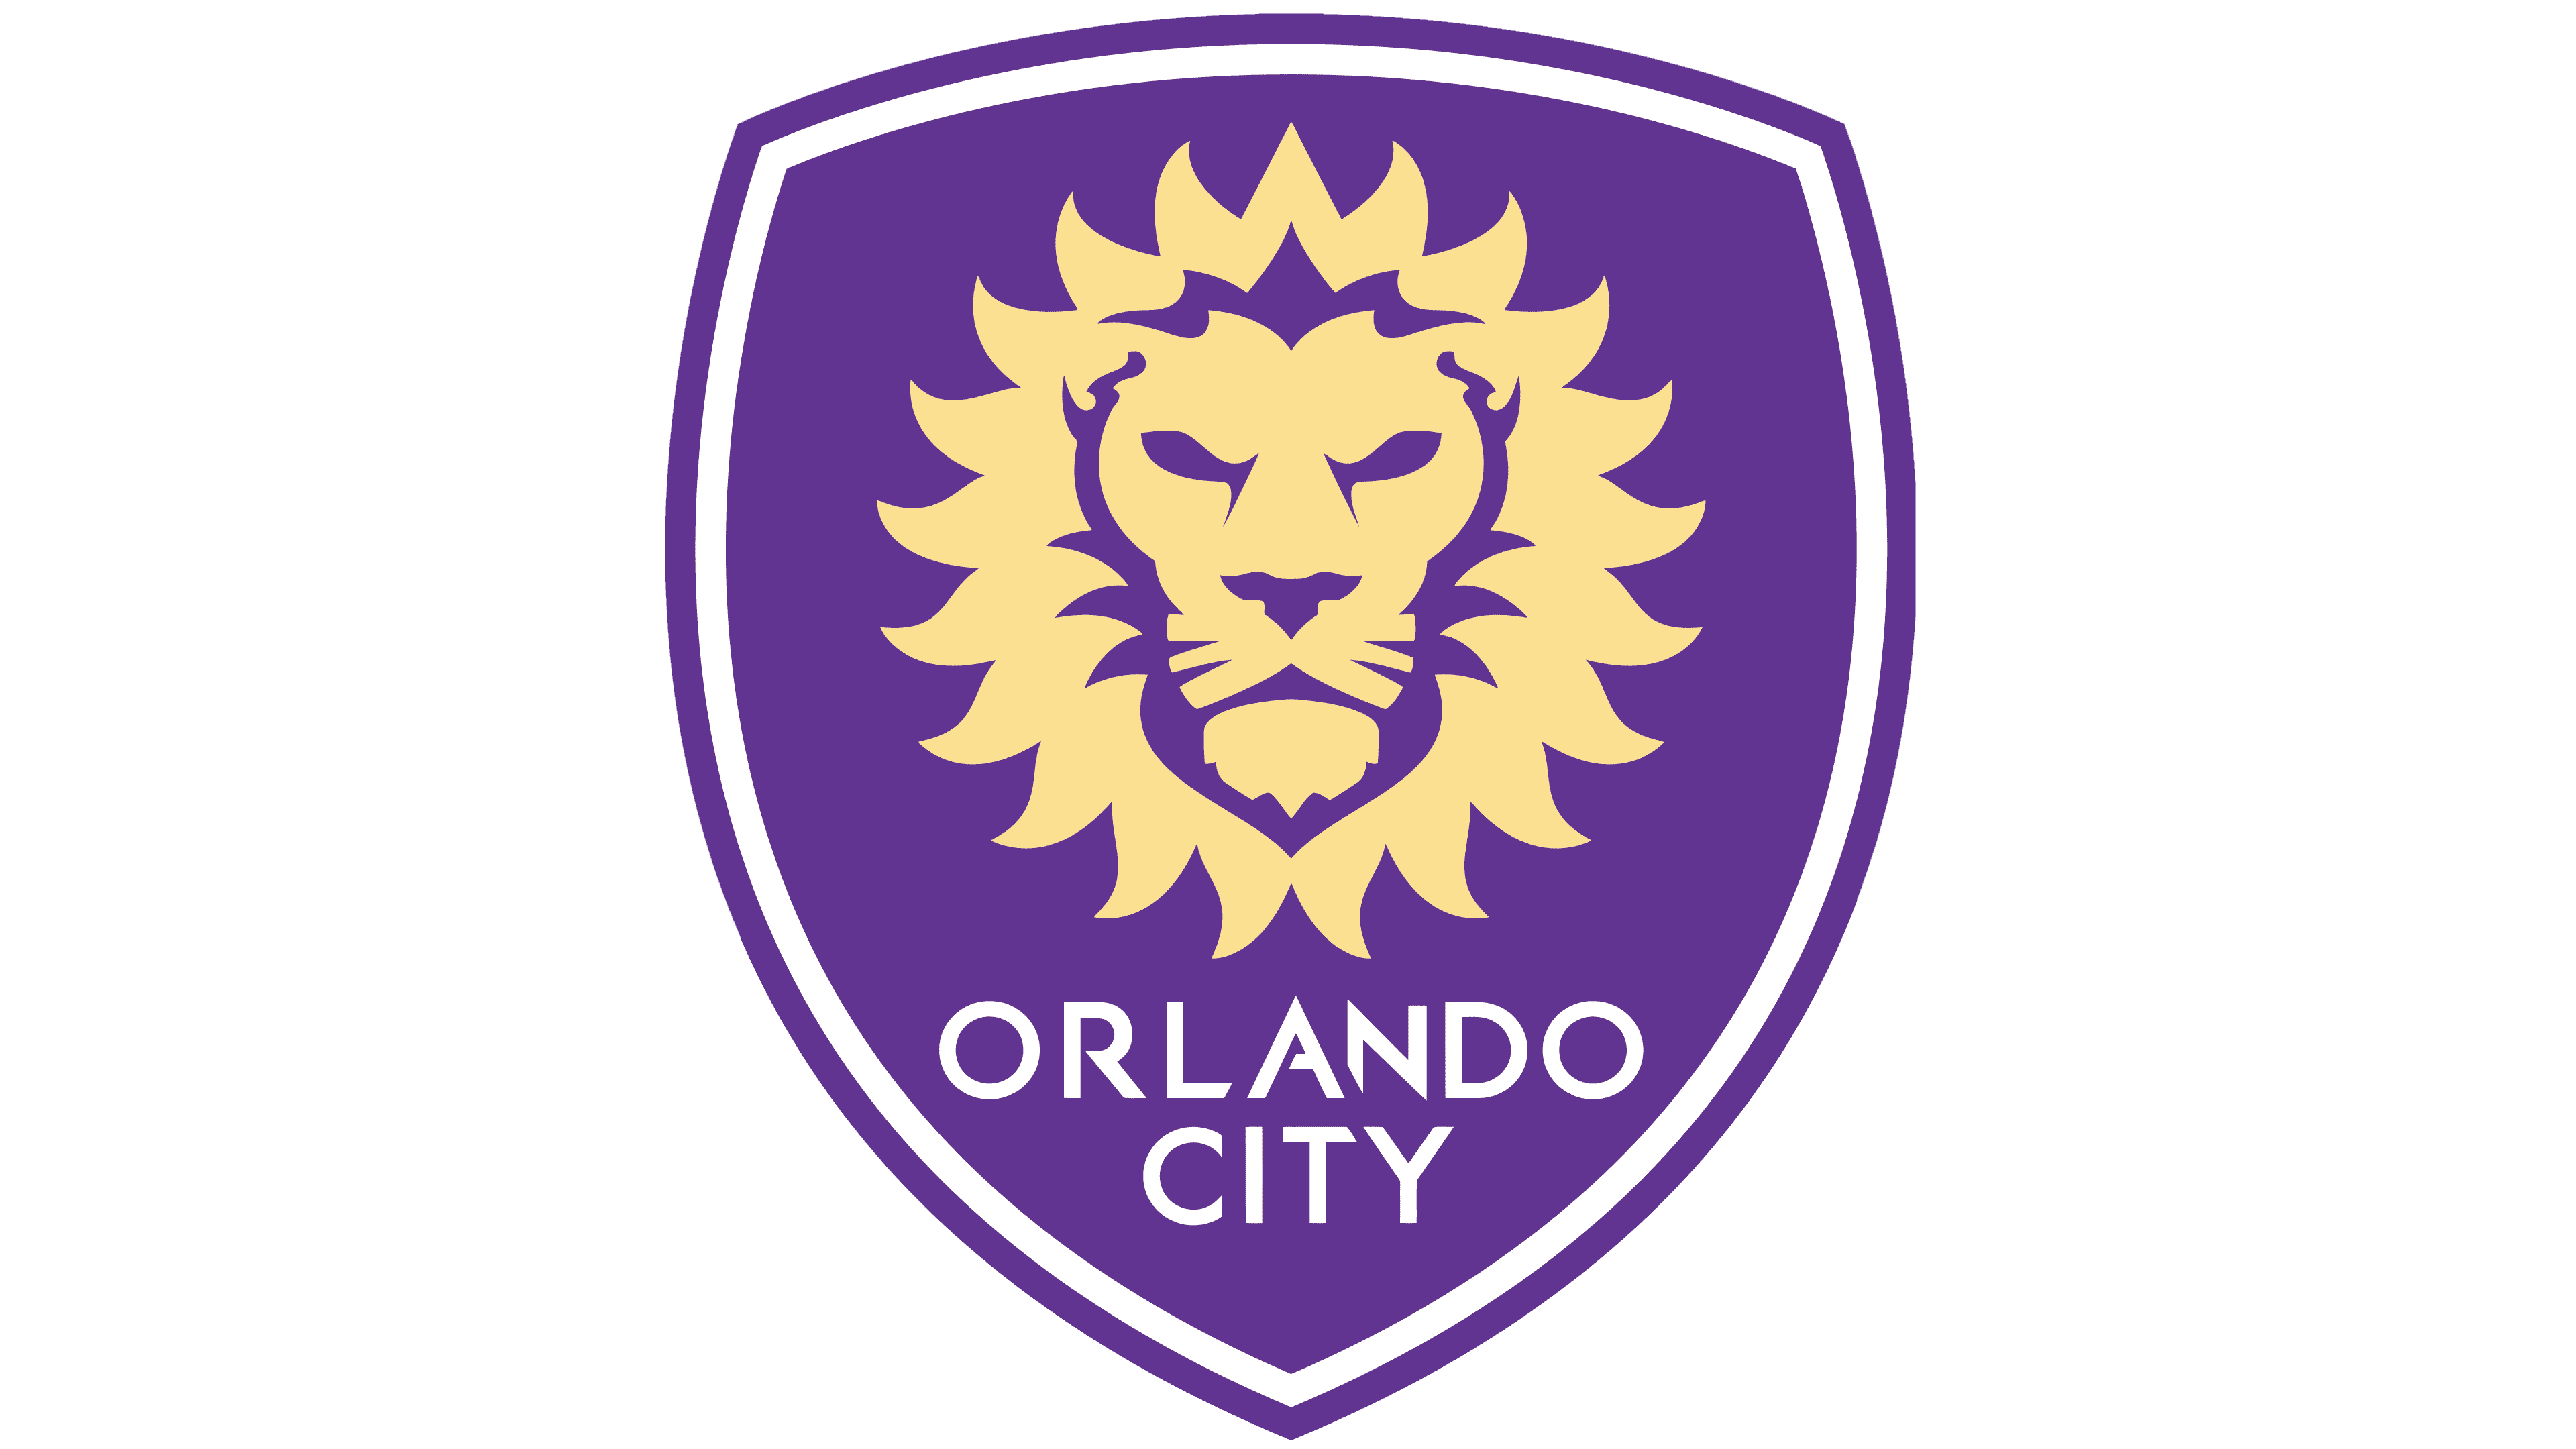 United Soccer League (USL) logo and symbol, meaning, history, PNG, brand